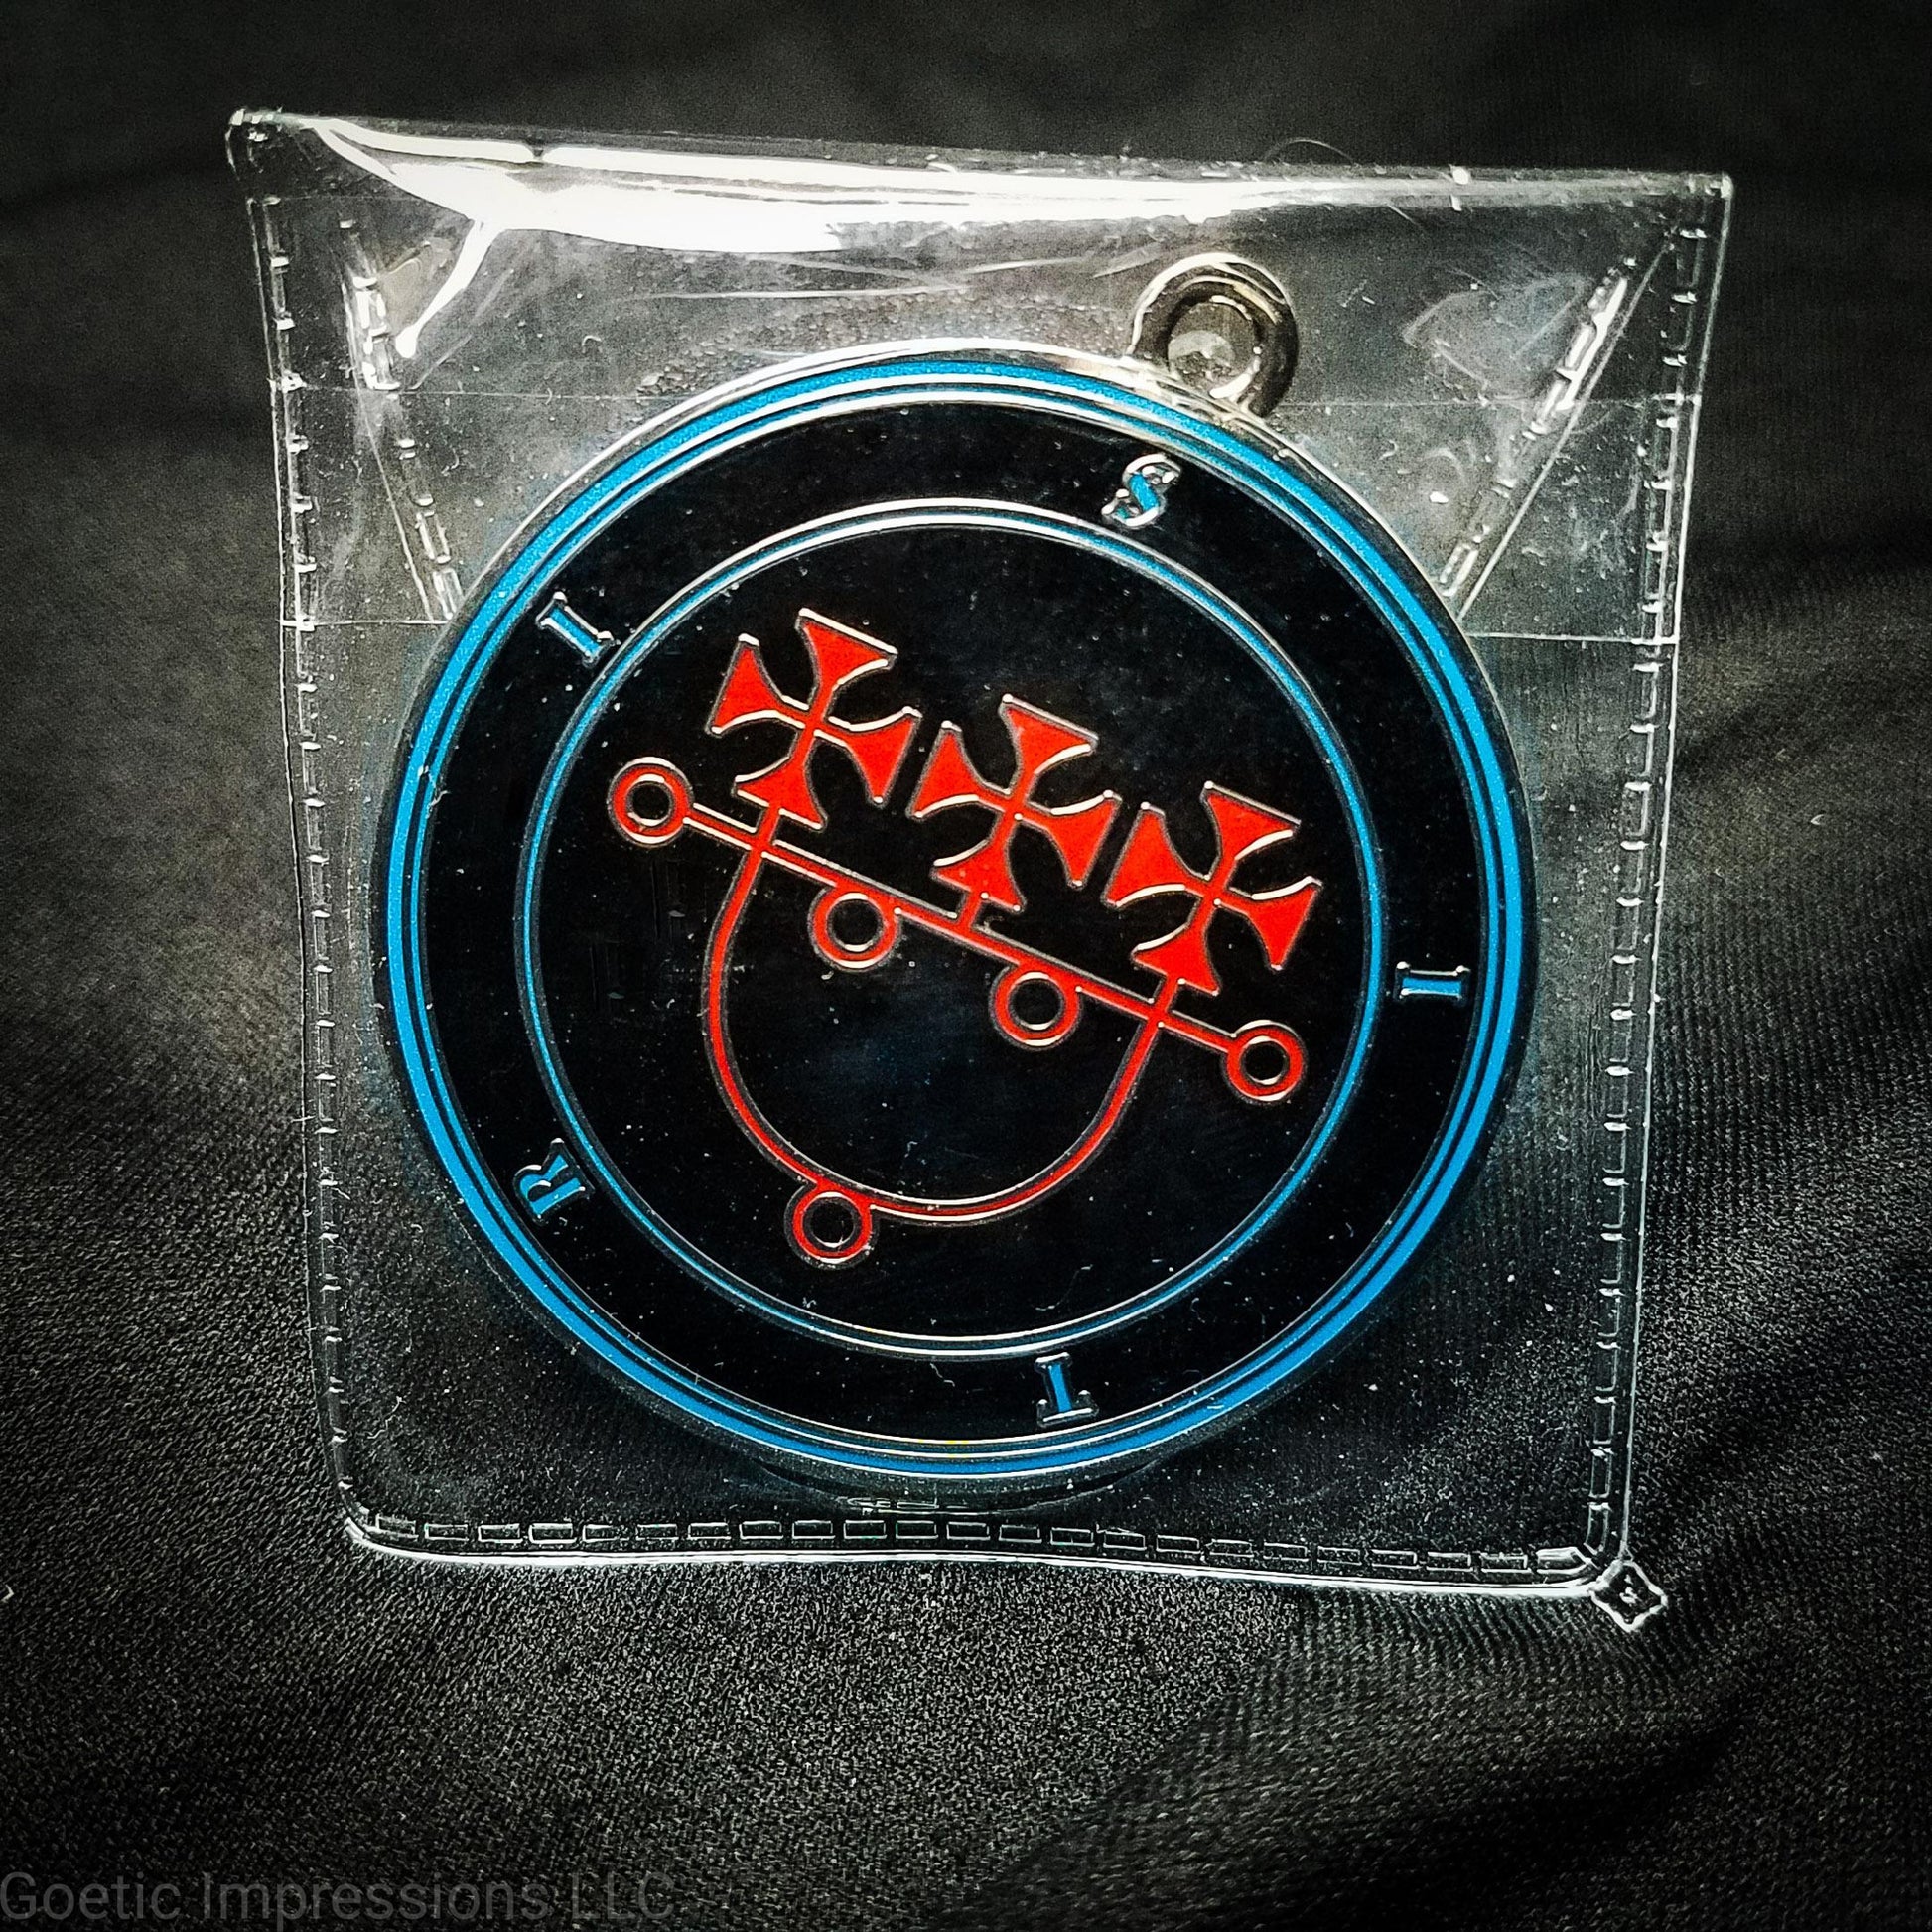 Medallion of the Ars Goetia spirit sitri. The sigil is red with blue circles and text on a black background. The medallion is silver.